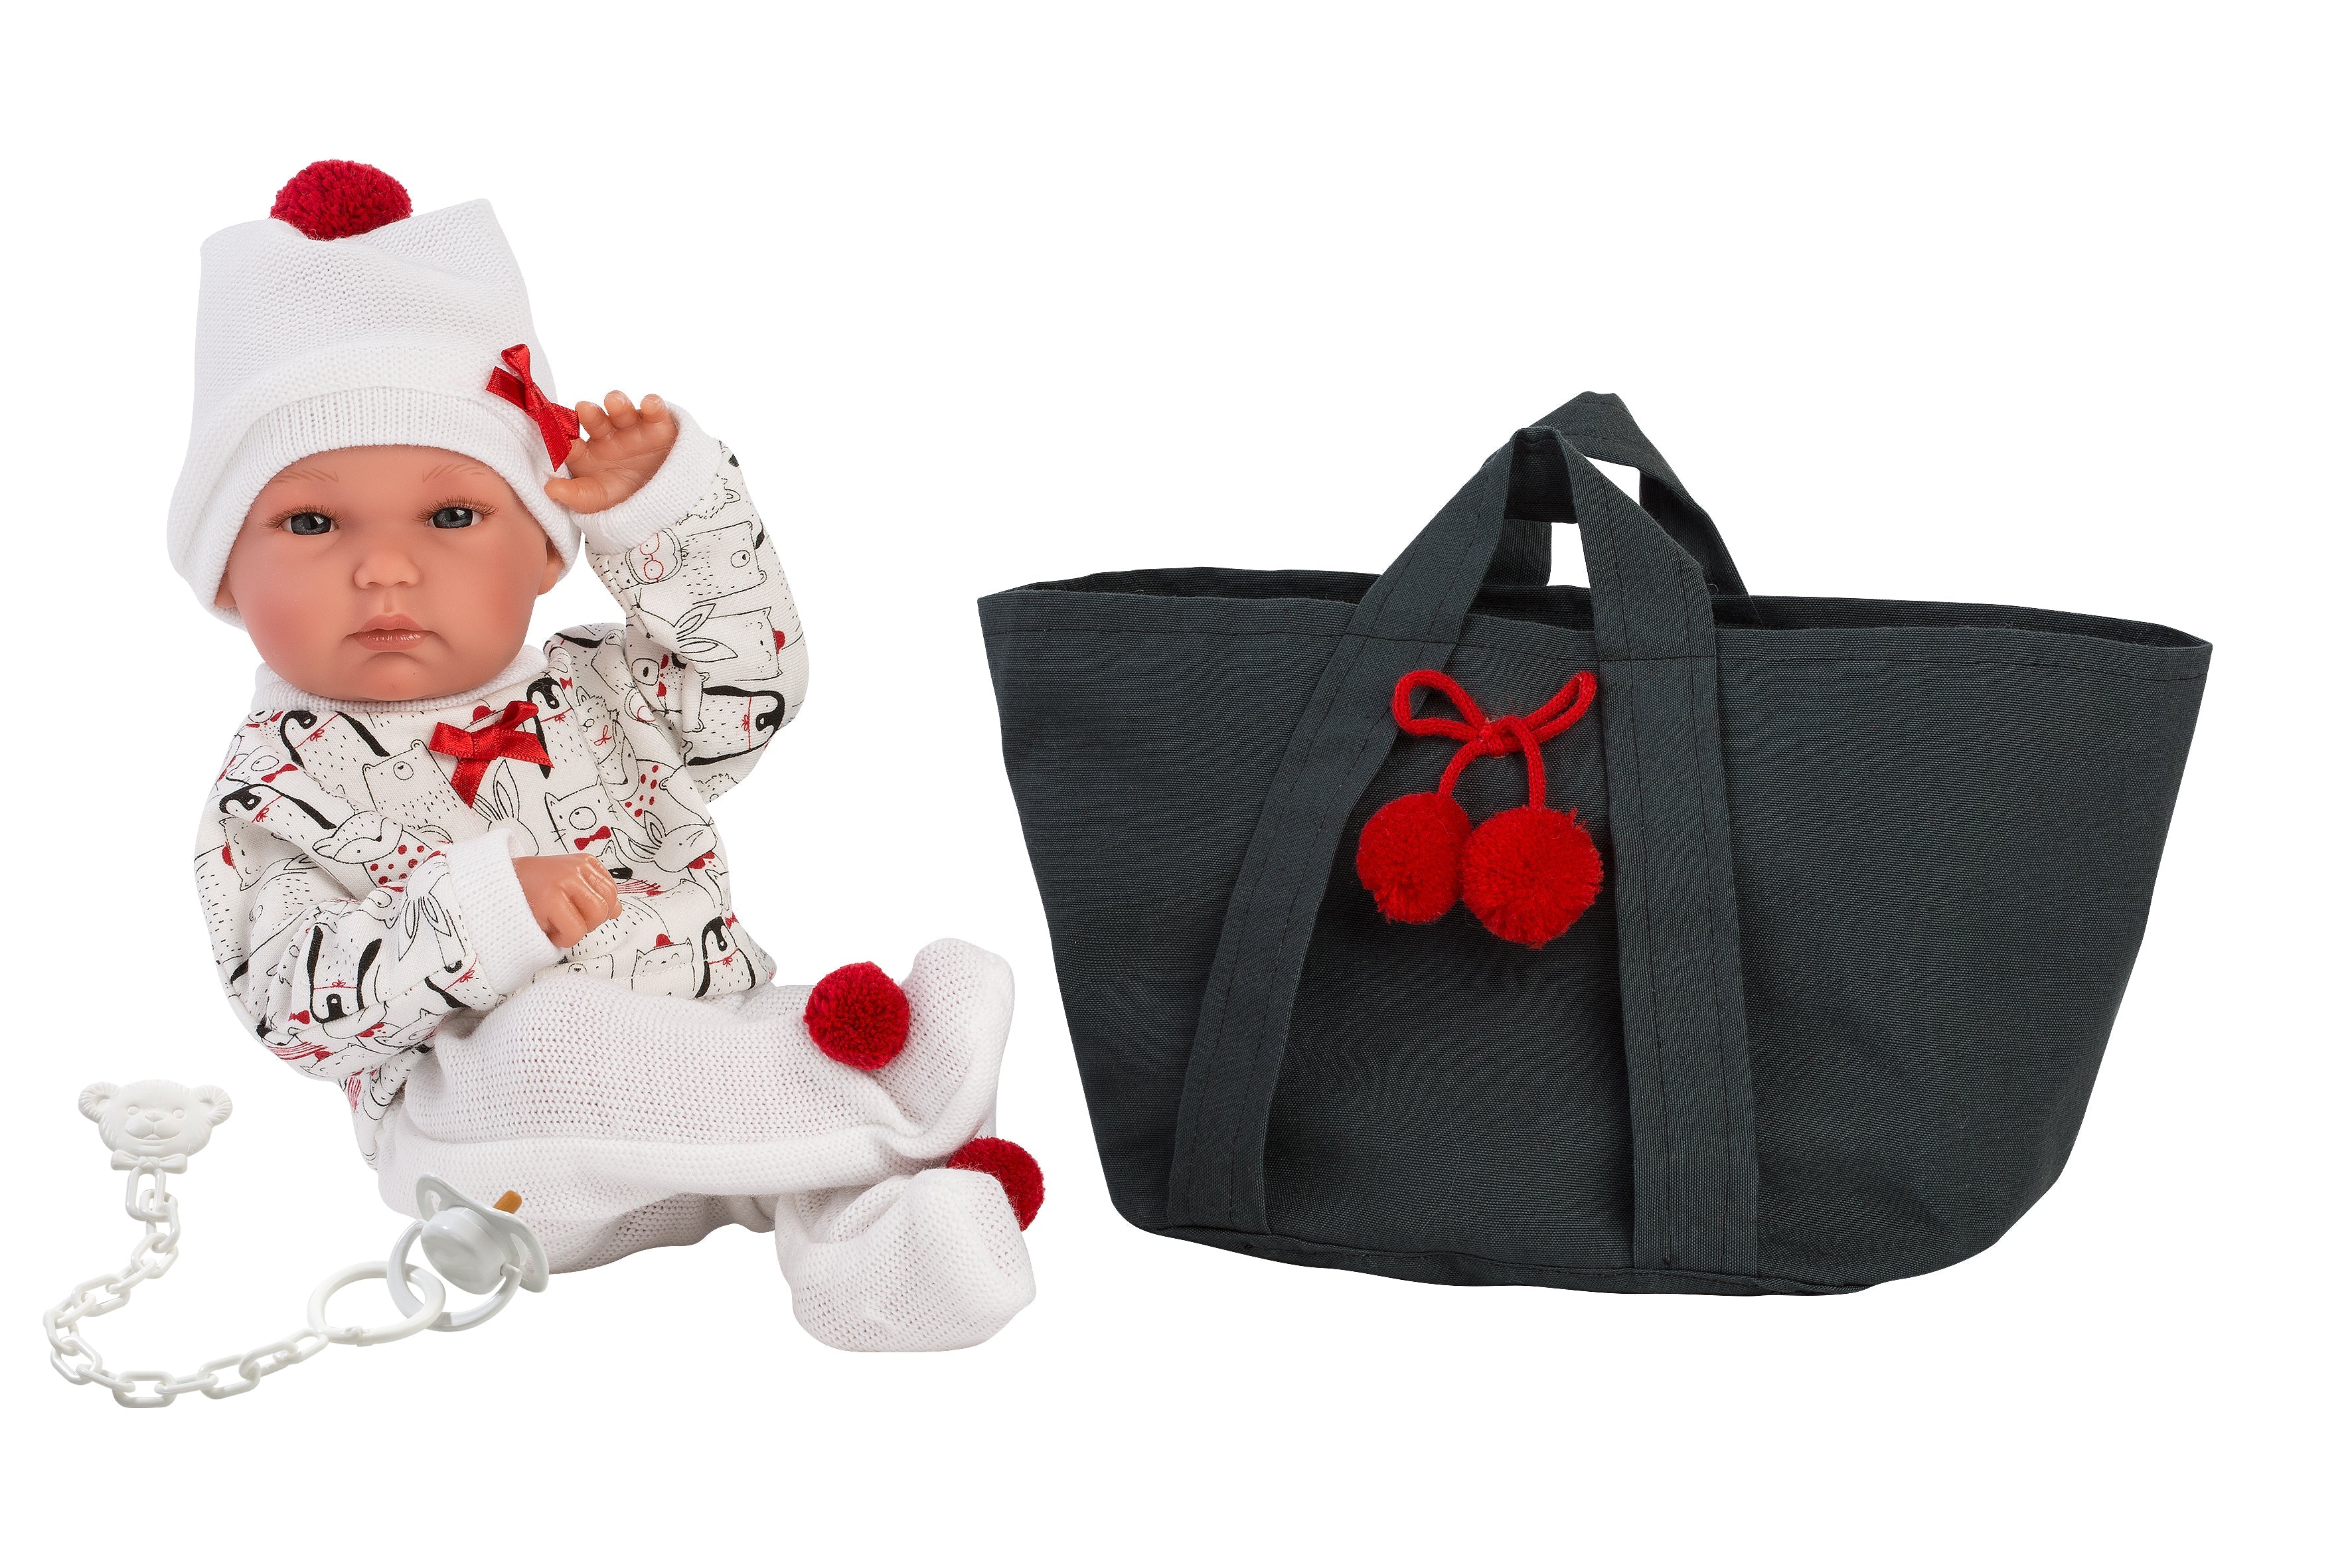 Llorens 13.8" Anatomically-correct Baby Doll Lucy With Cherry Carrycot Dolls